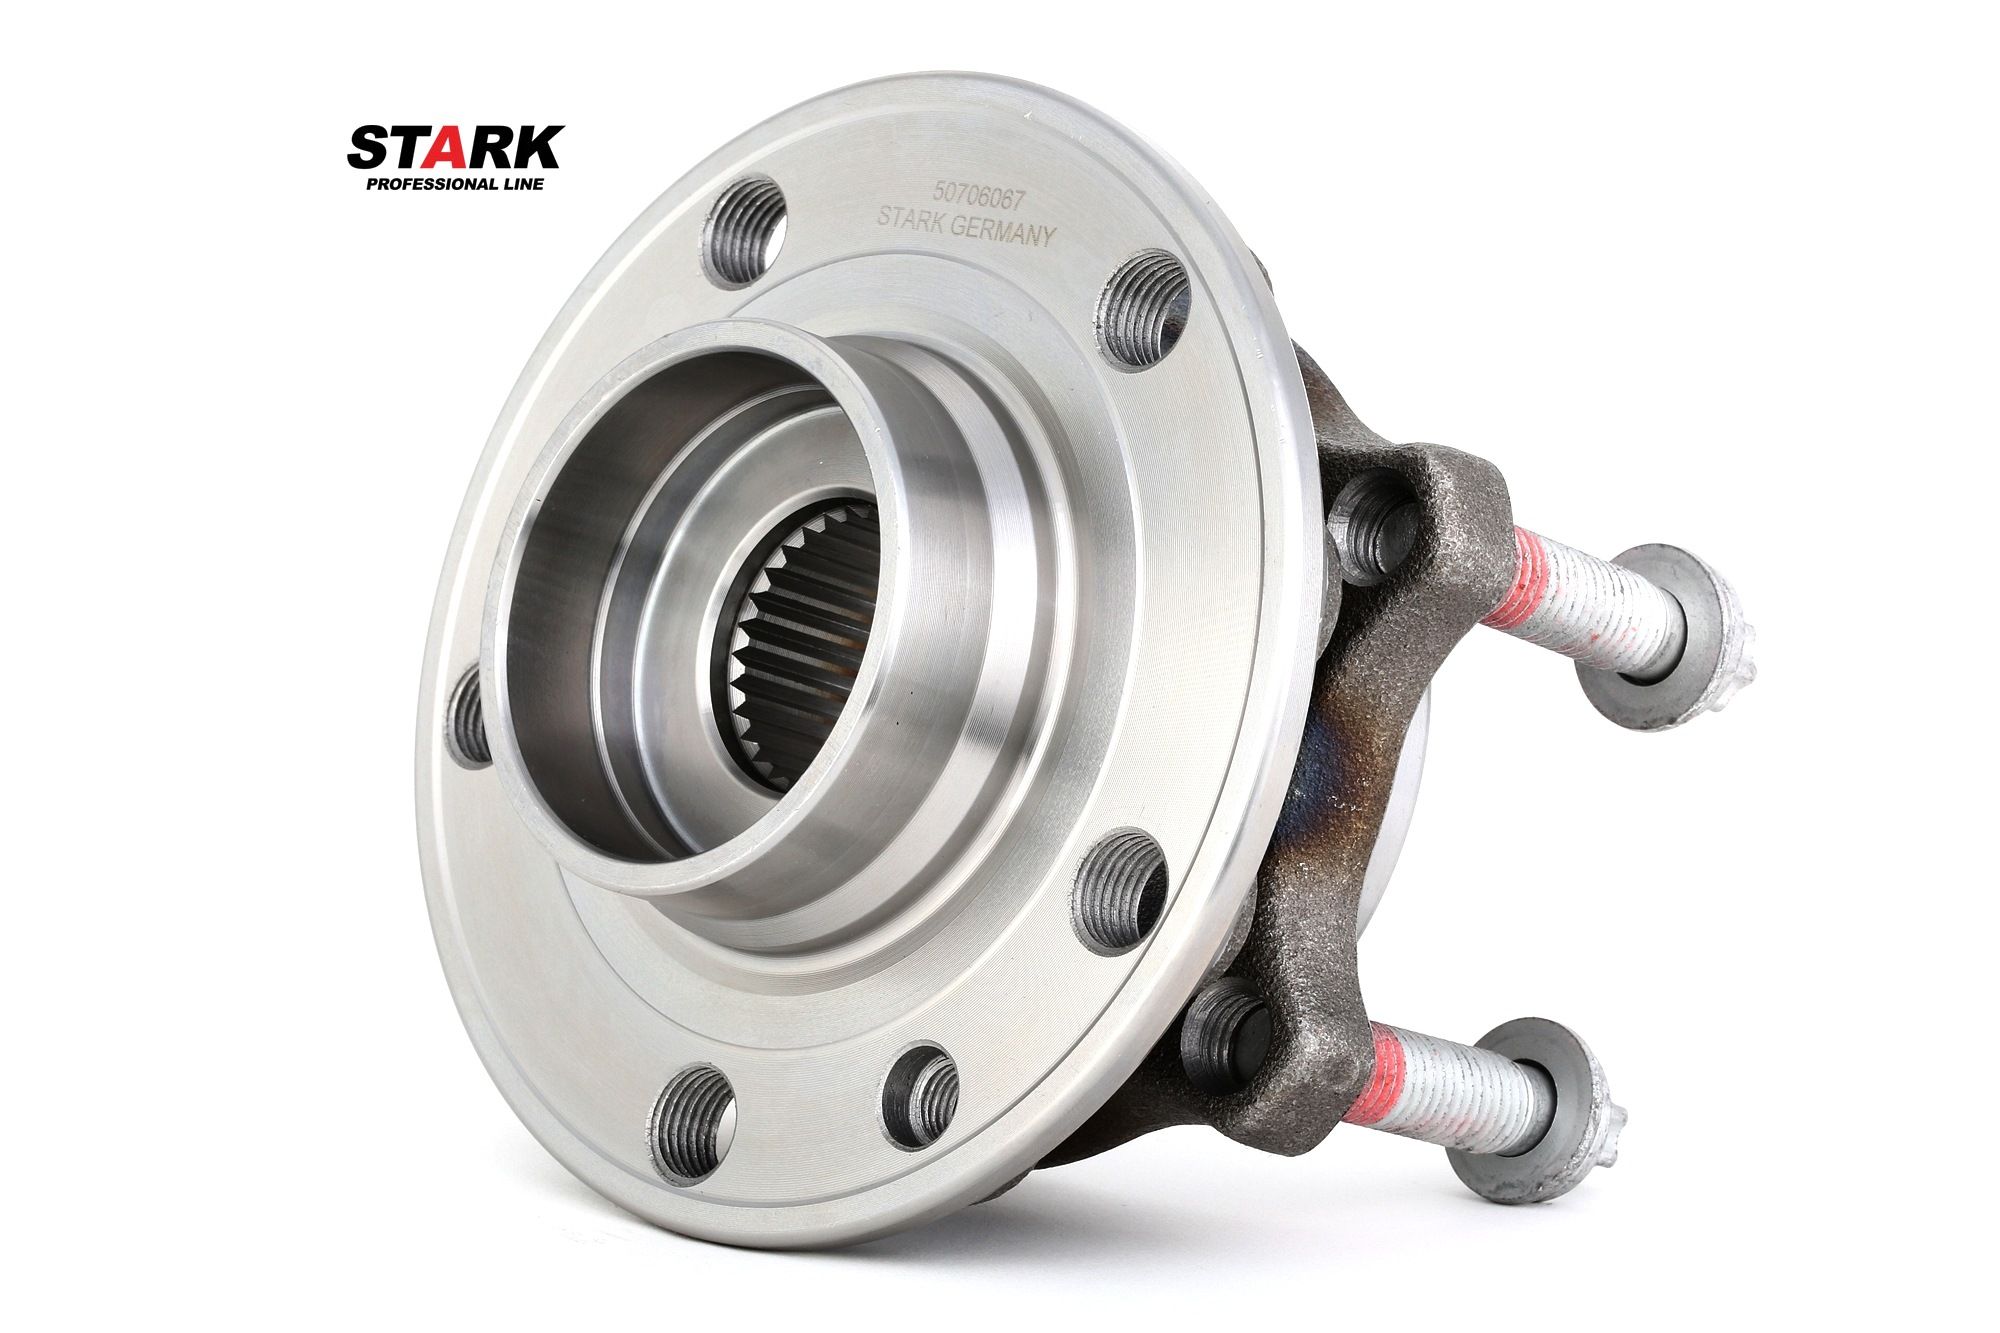 STARK SKWB-0180299 Wheel bearing kit Front axle both sides, with integrated ABS sensor, with bolts/screws